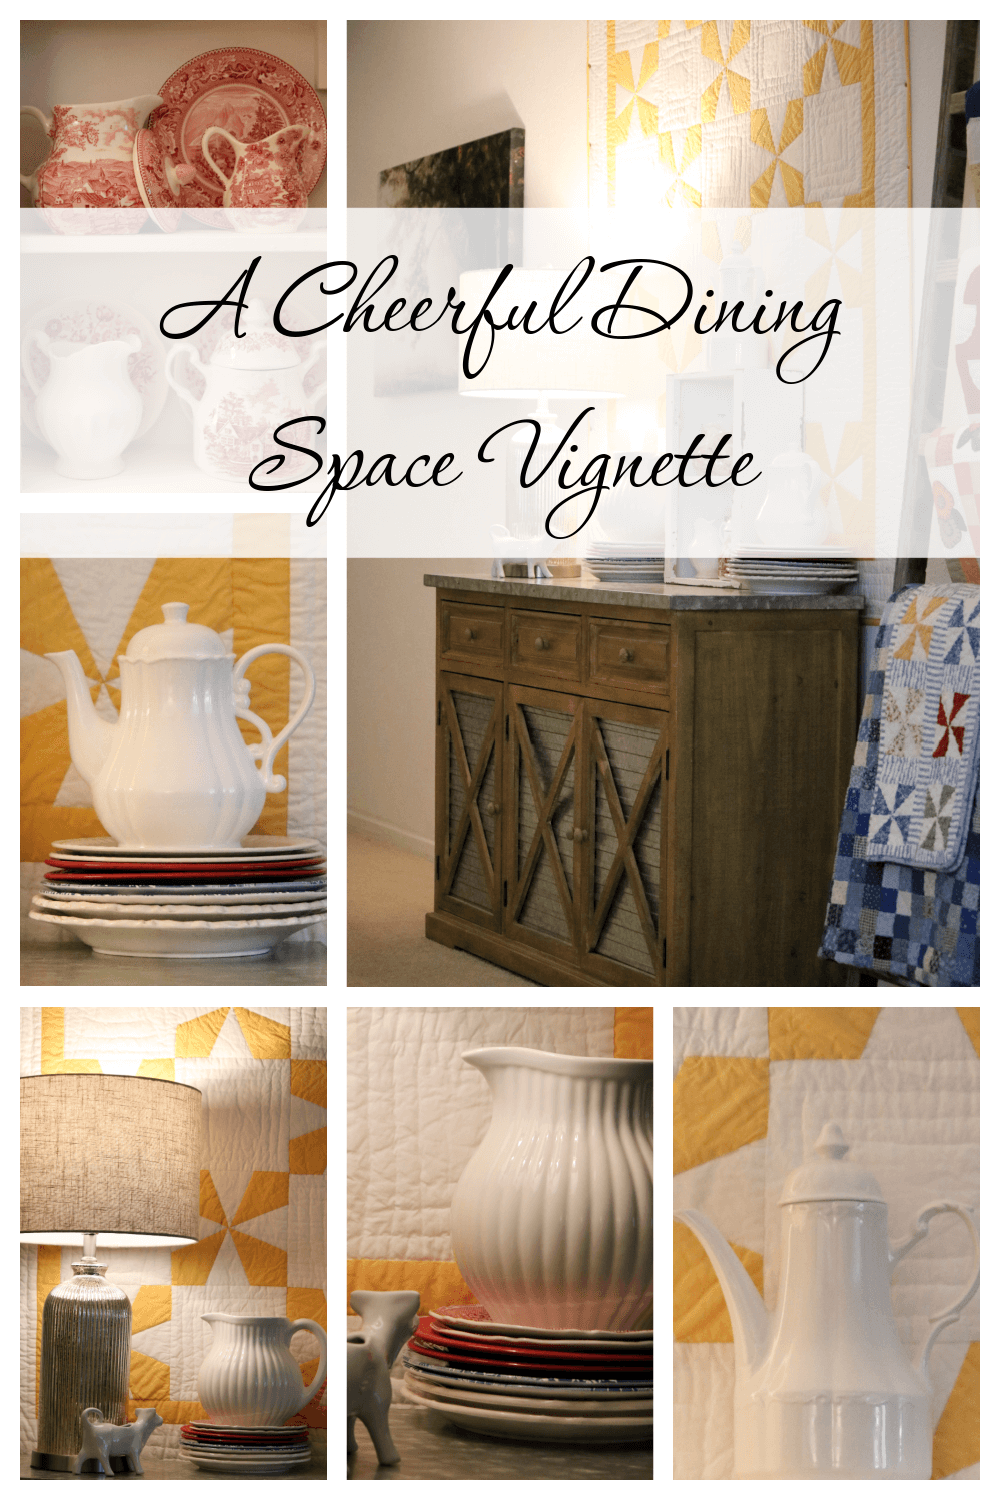 A Cheerful Dining Space Vignette